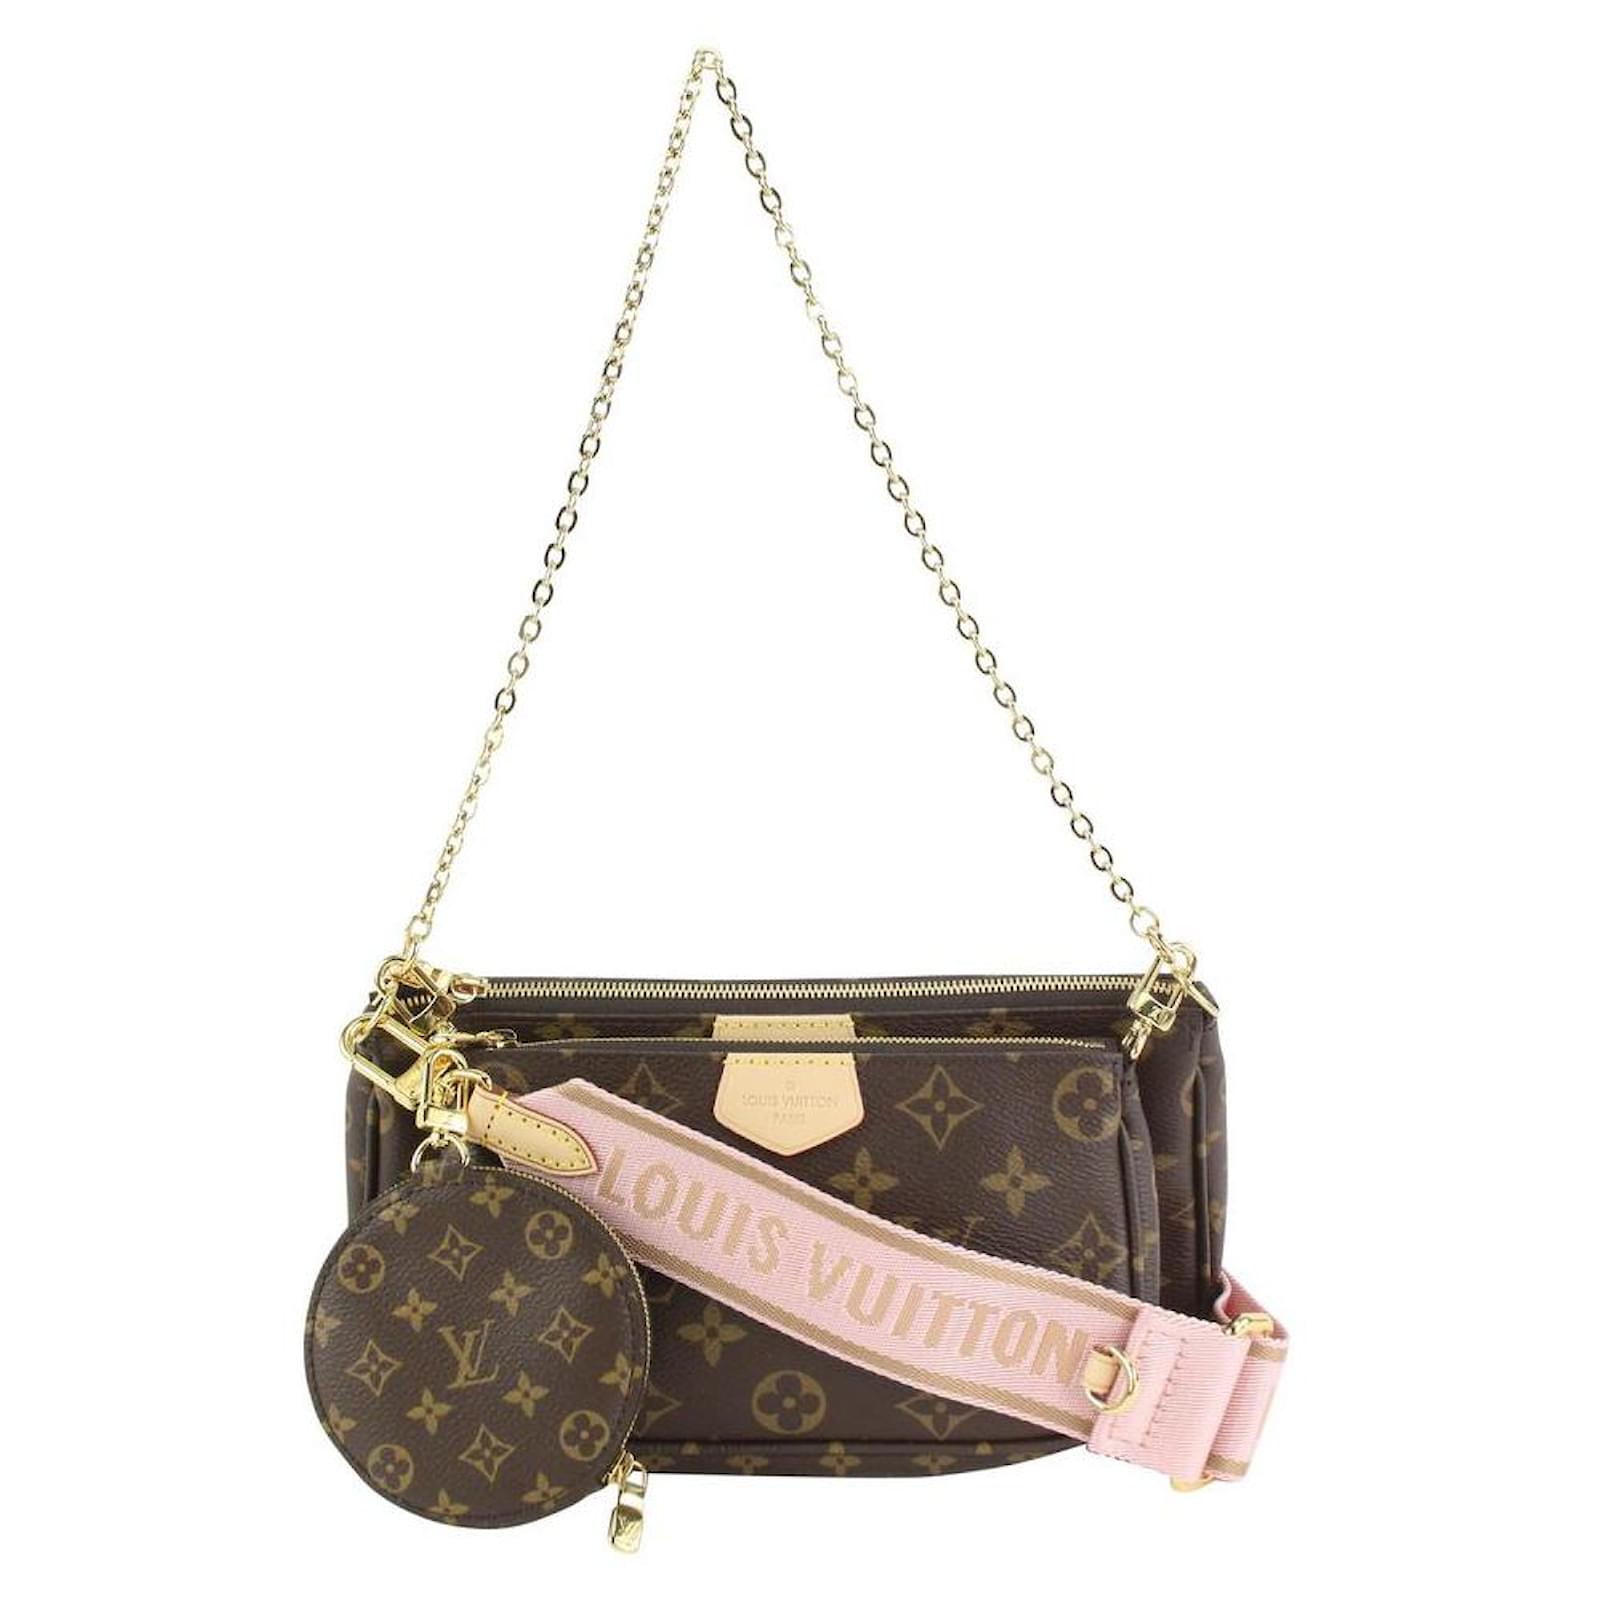 where is the date code on louis vuitton pochette